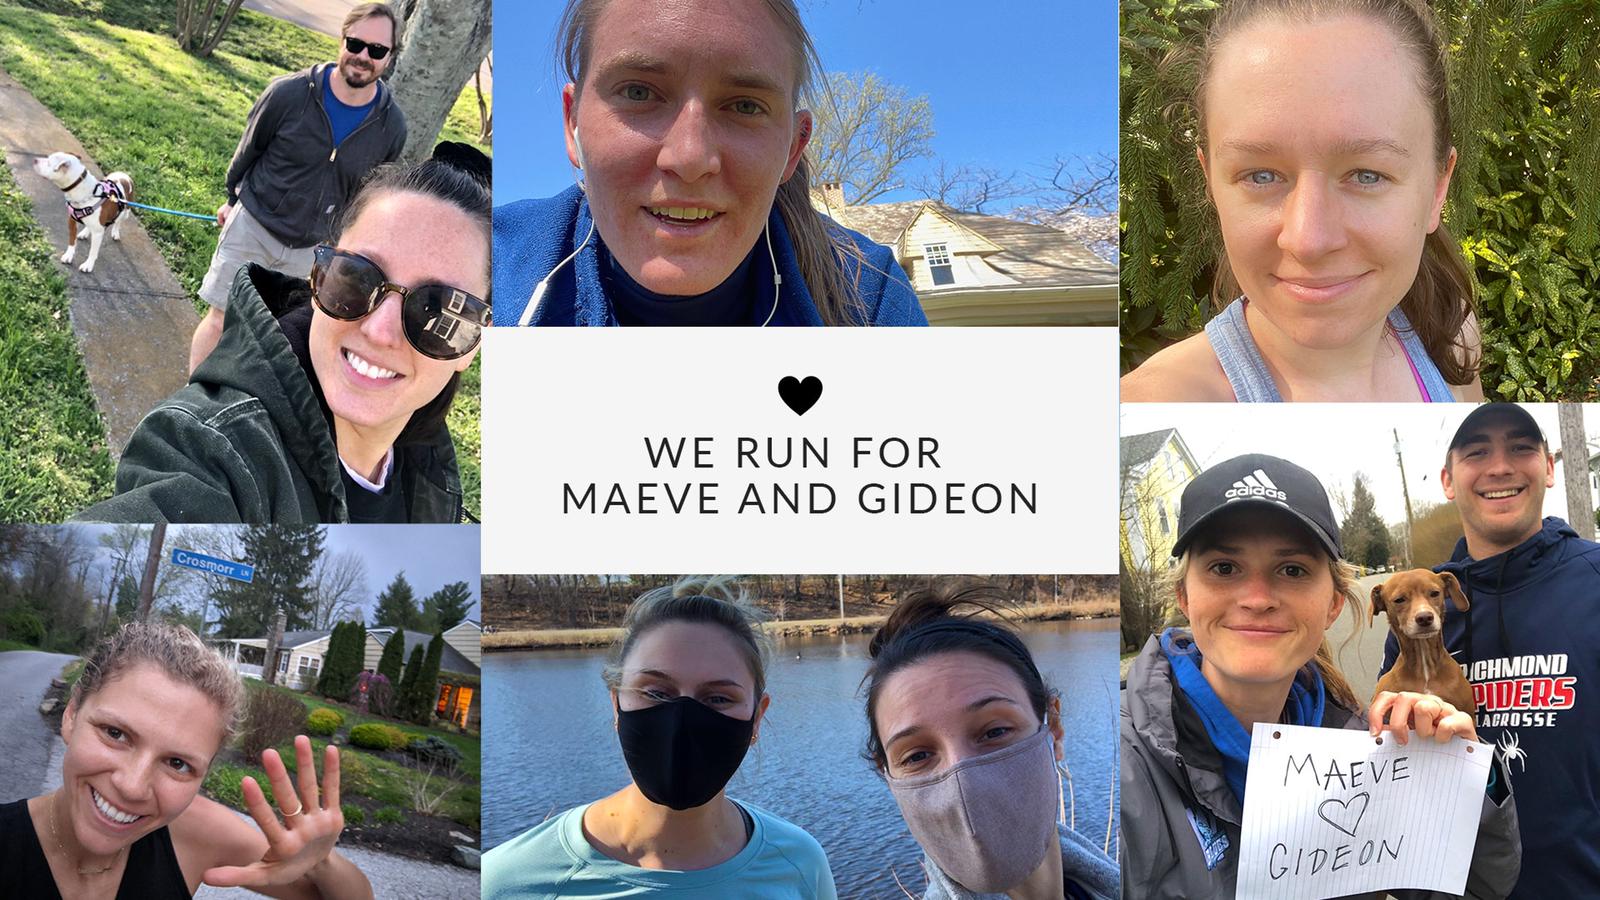 Running for Maeve and Gideon